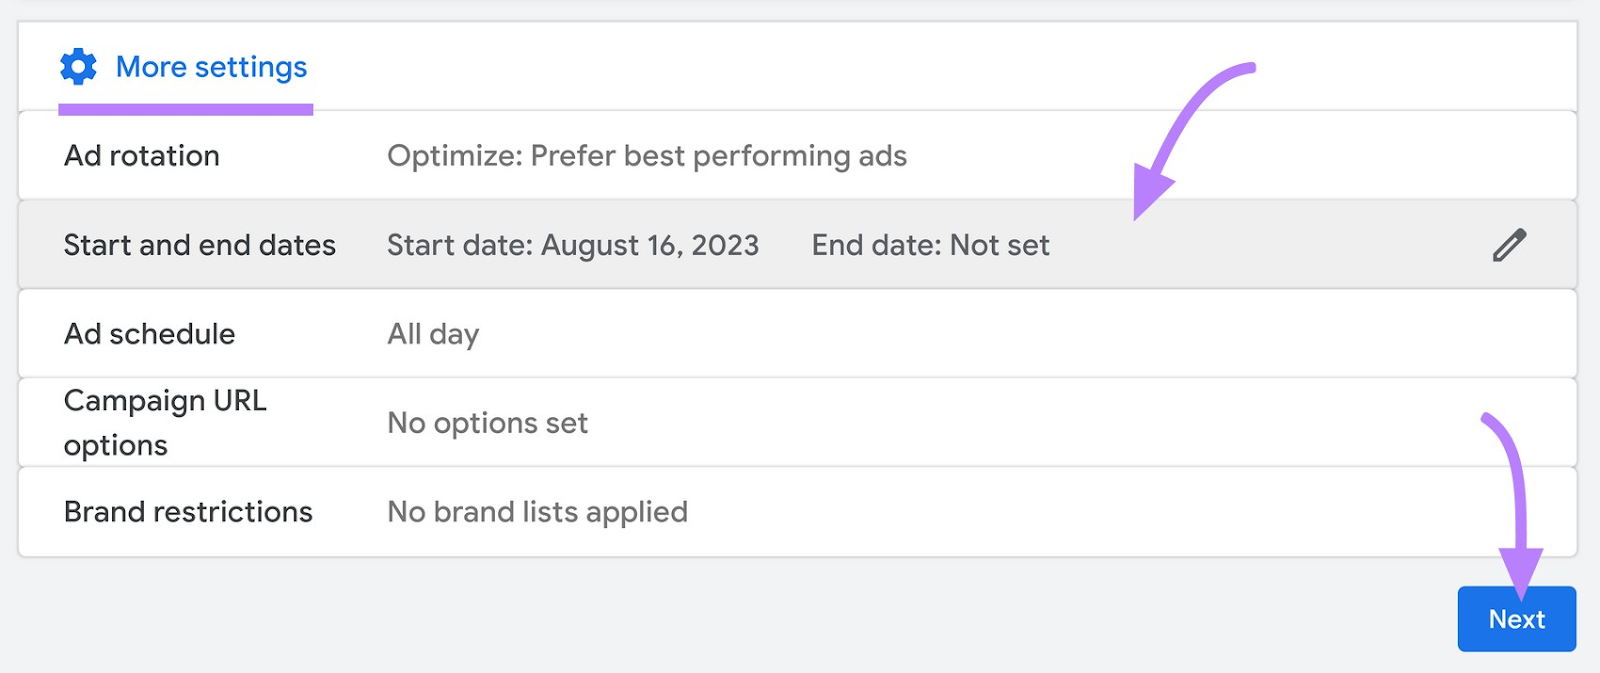 “More settings” section in Google Ads